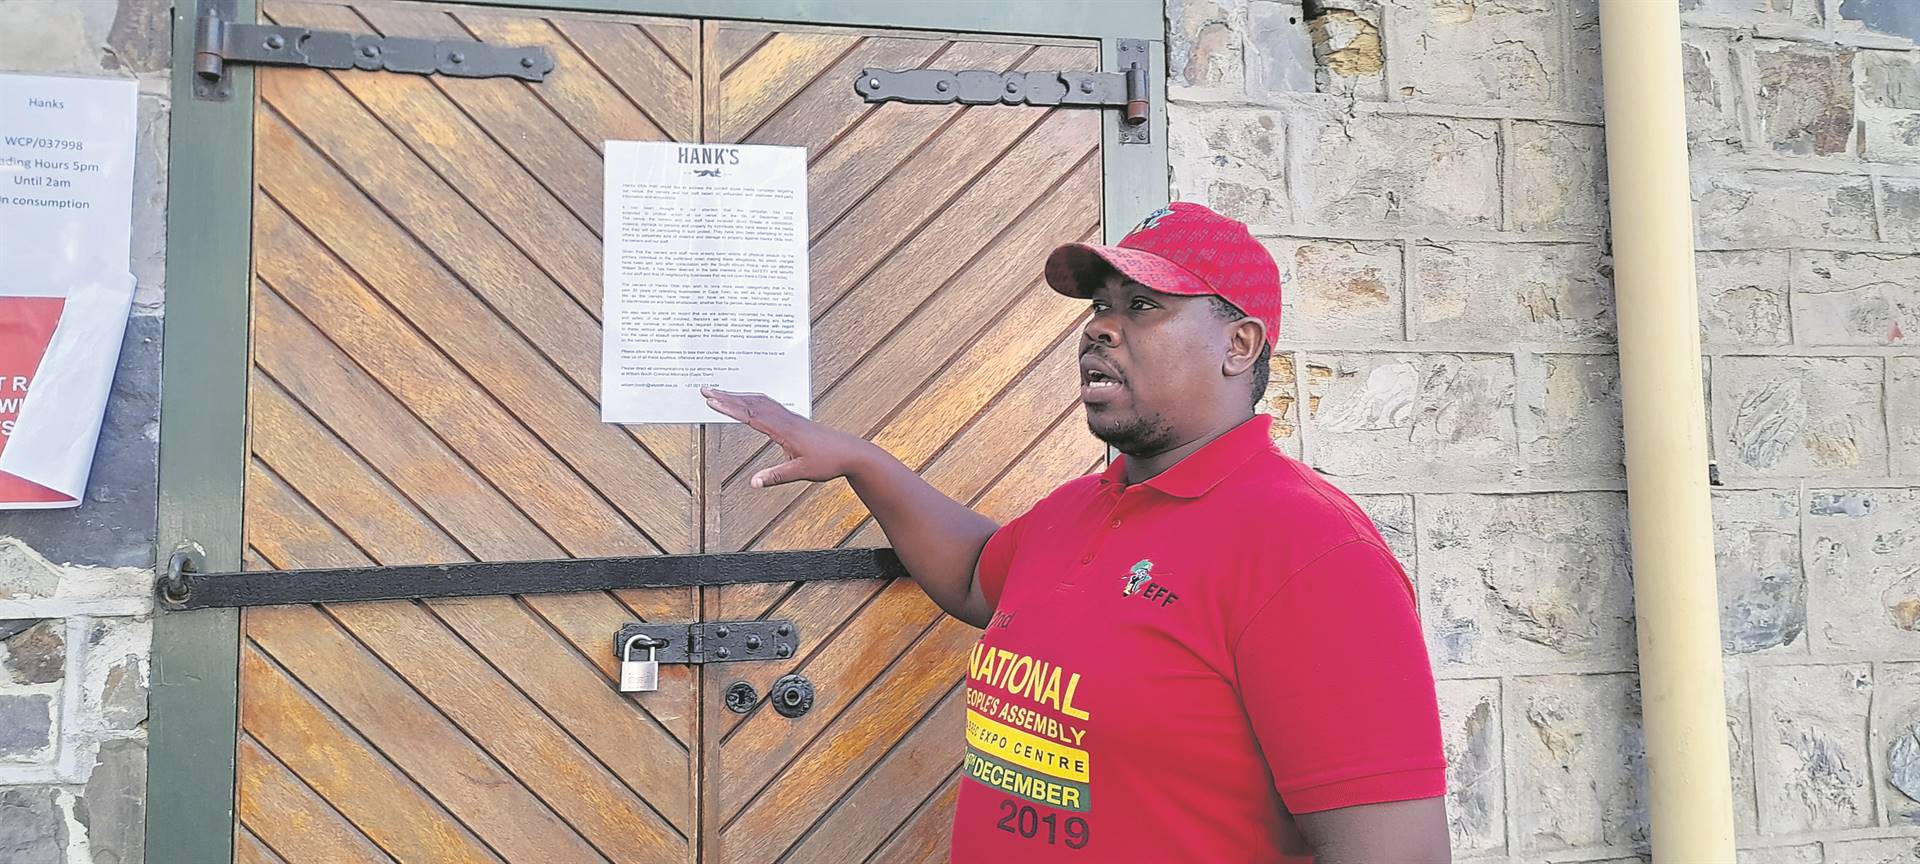 EFF members staged a picket outside a tavern that has been accused of racism in the Cape Town CBD, but found it closed. Photo by Misheck Makora 